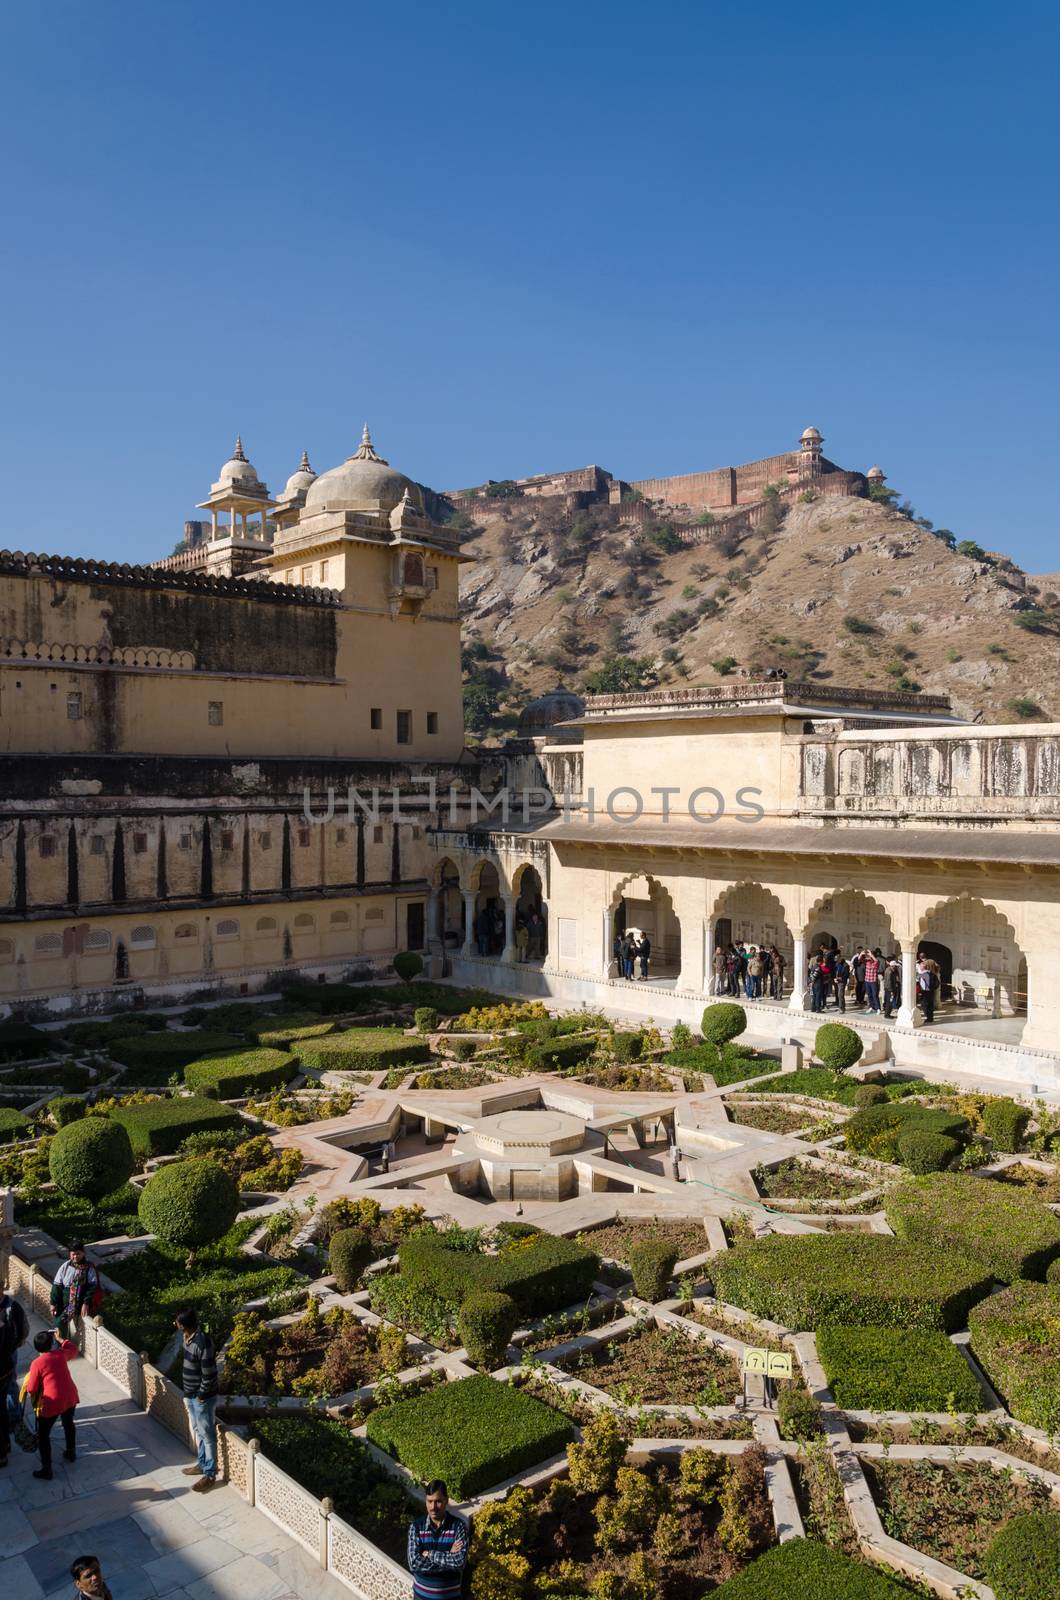 Jaipur, India - December29, 2014: Tourist visit Sukh Niwas the Third Courtyard in Amber Fort near Jaipur, Rajasthan, India on December29, 2014. The third courtyard is where the private quarters of the Maharaja, his family and attendants were built.